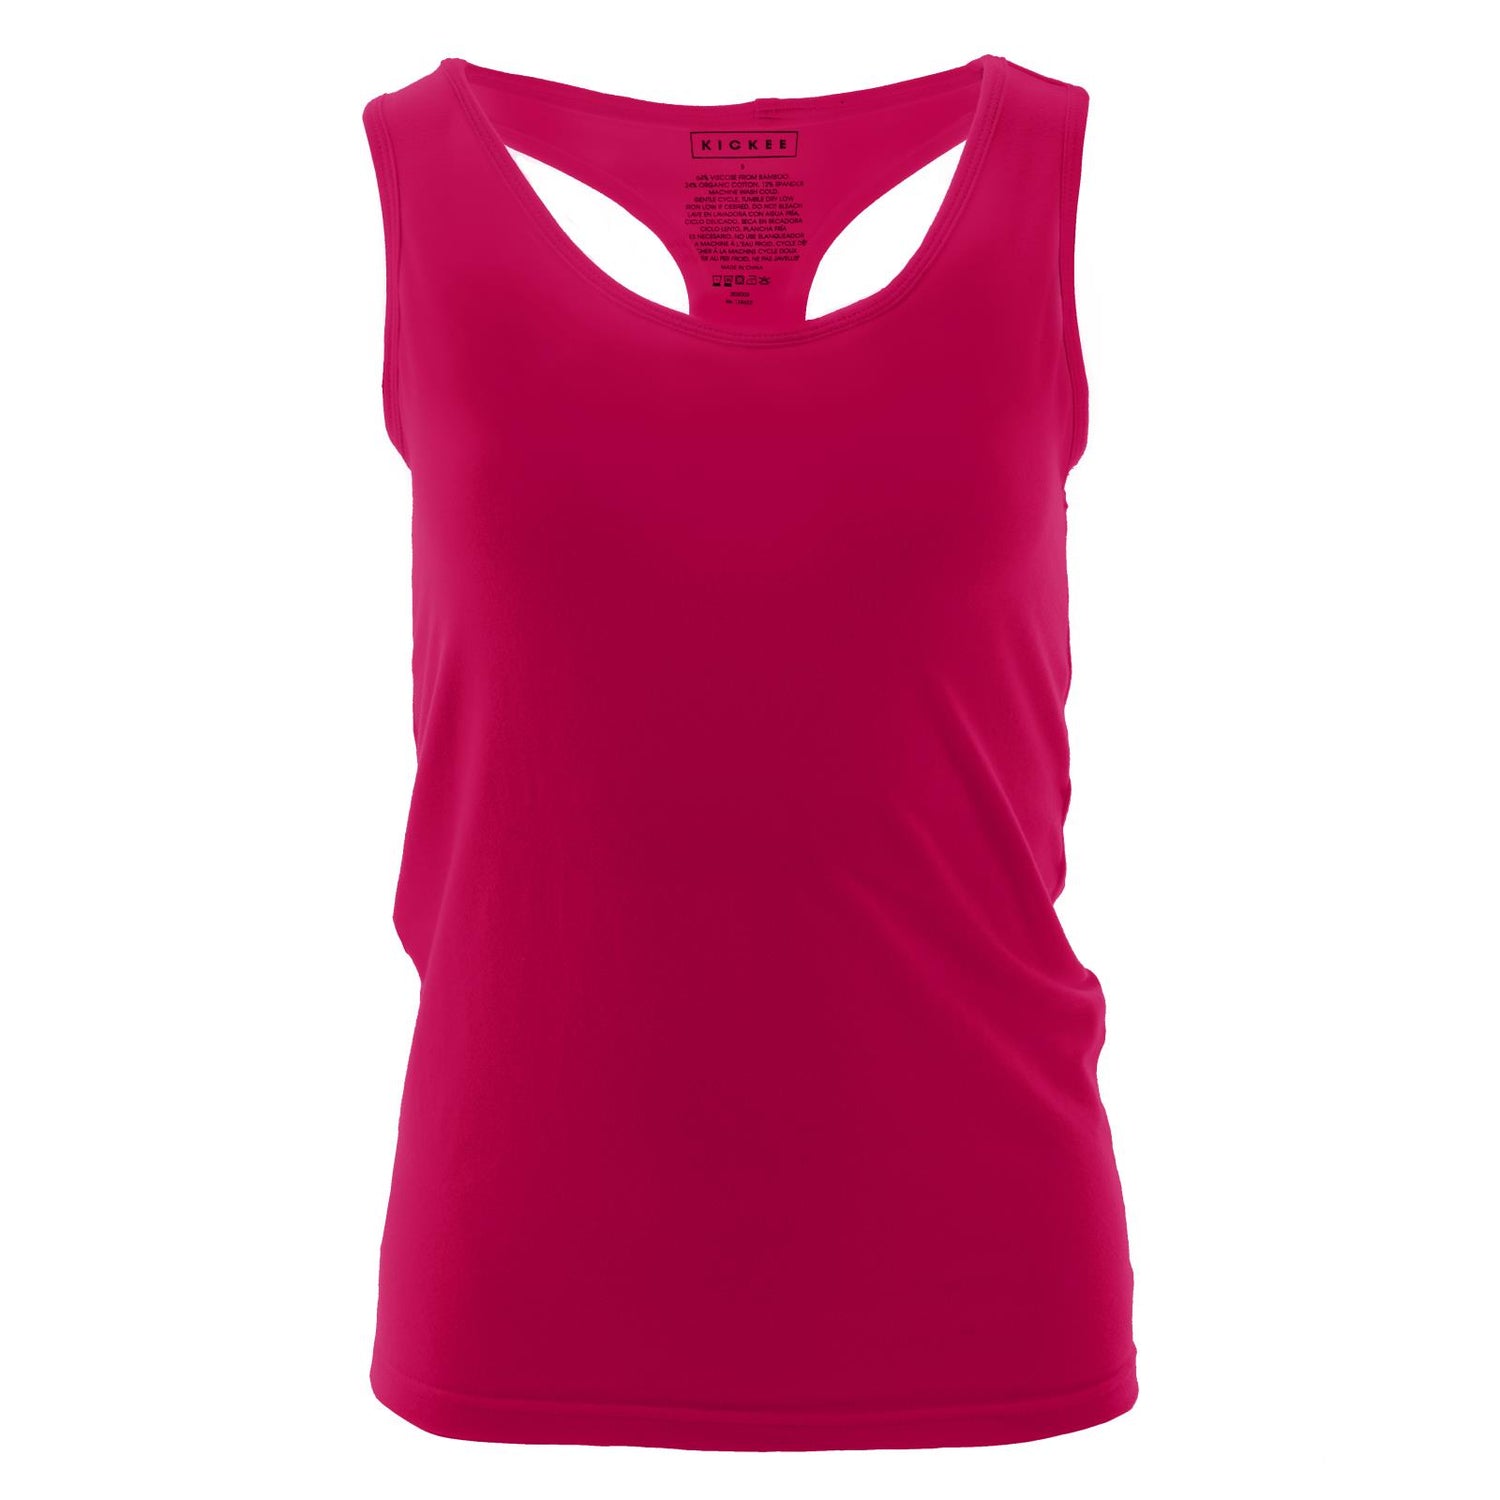 Women's Solid Luxe Stretch Tank in Prickly Pear